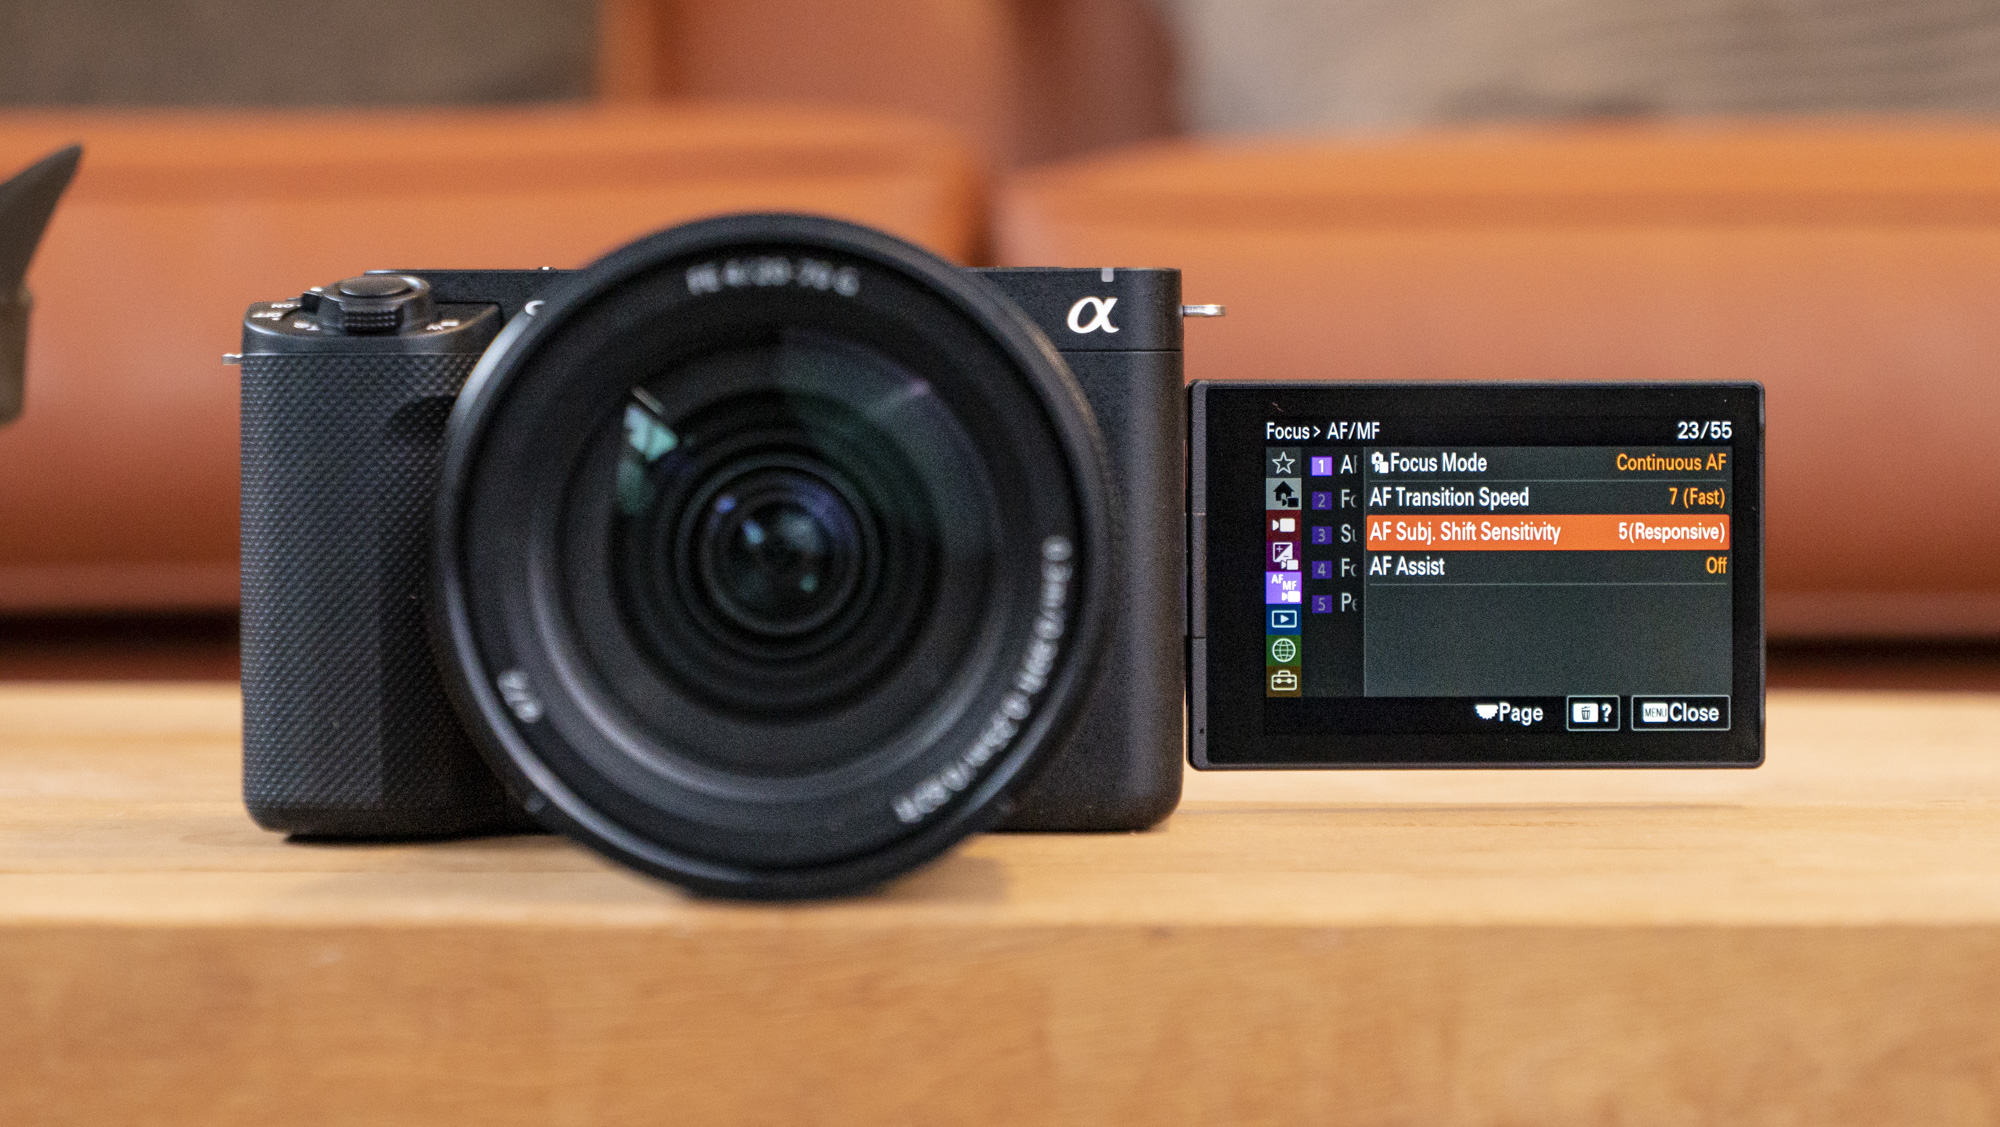 Sony ZV-E1 REVIEW: in-depth pros and cons 